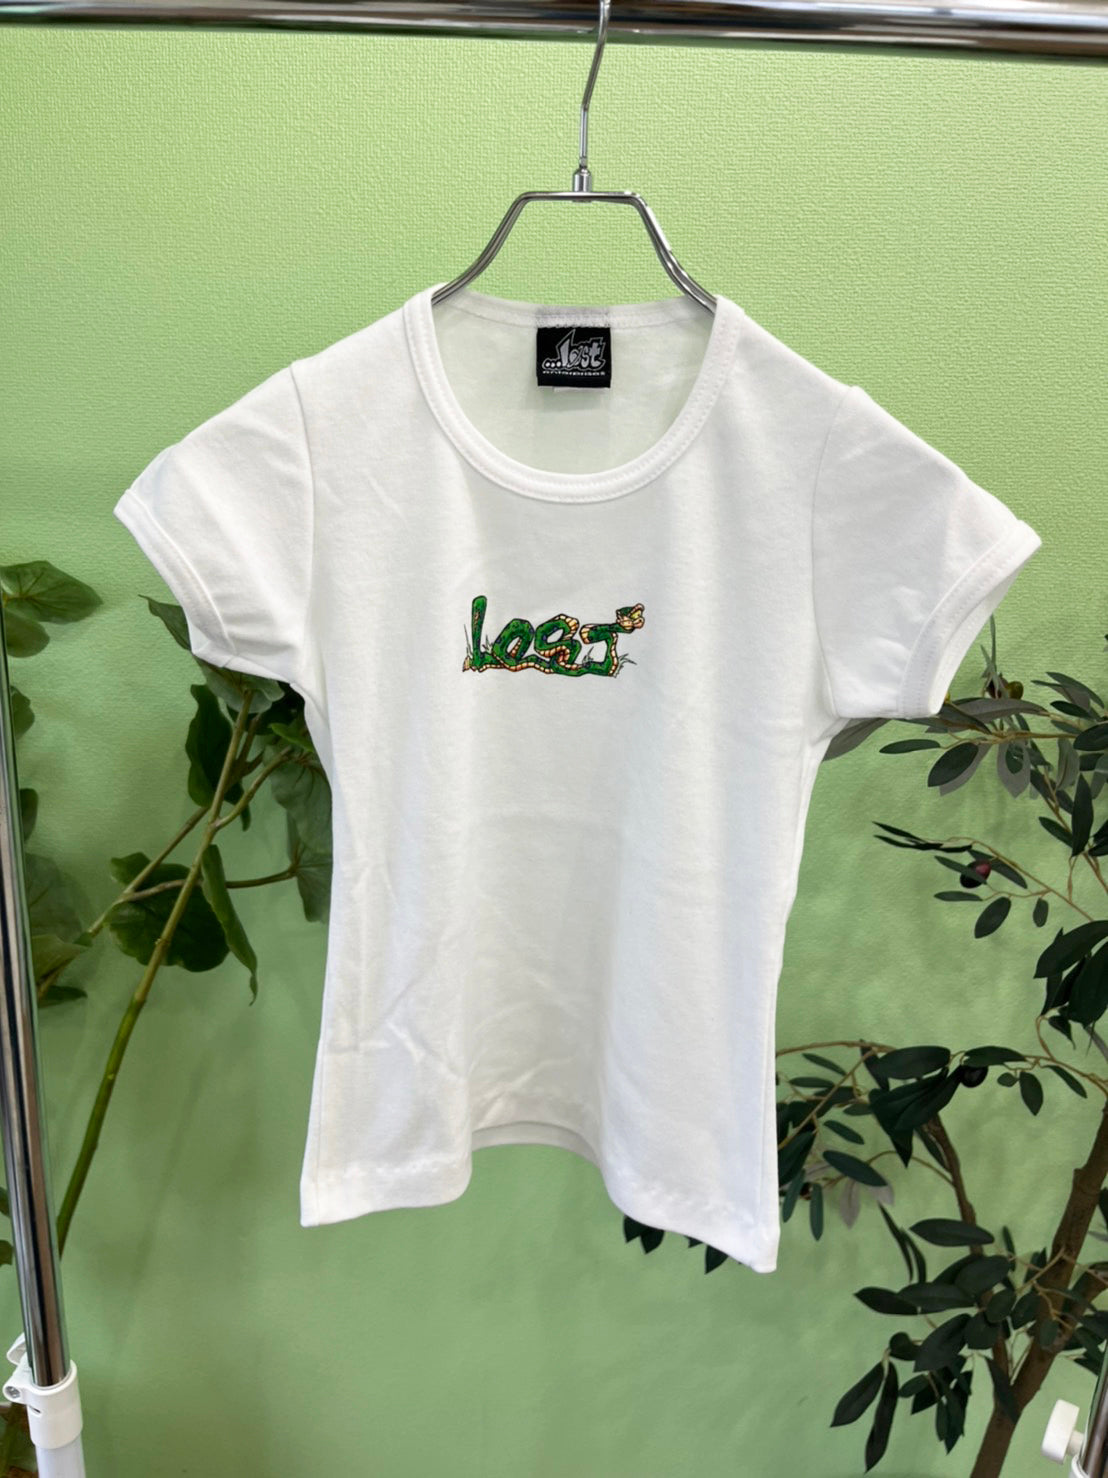 【LOST】Dead stock one wash 90's LOST T-shirt made in USA (women's S)